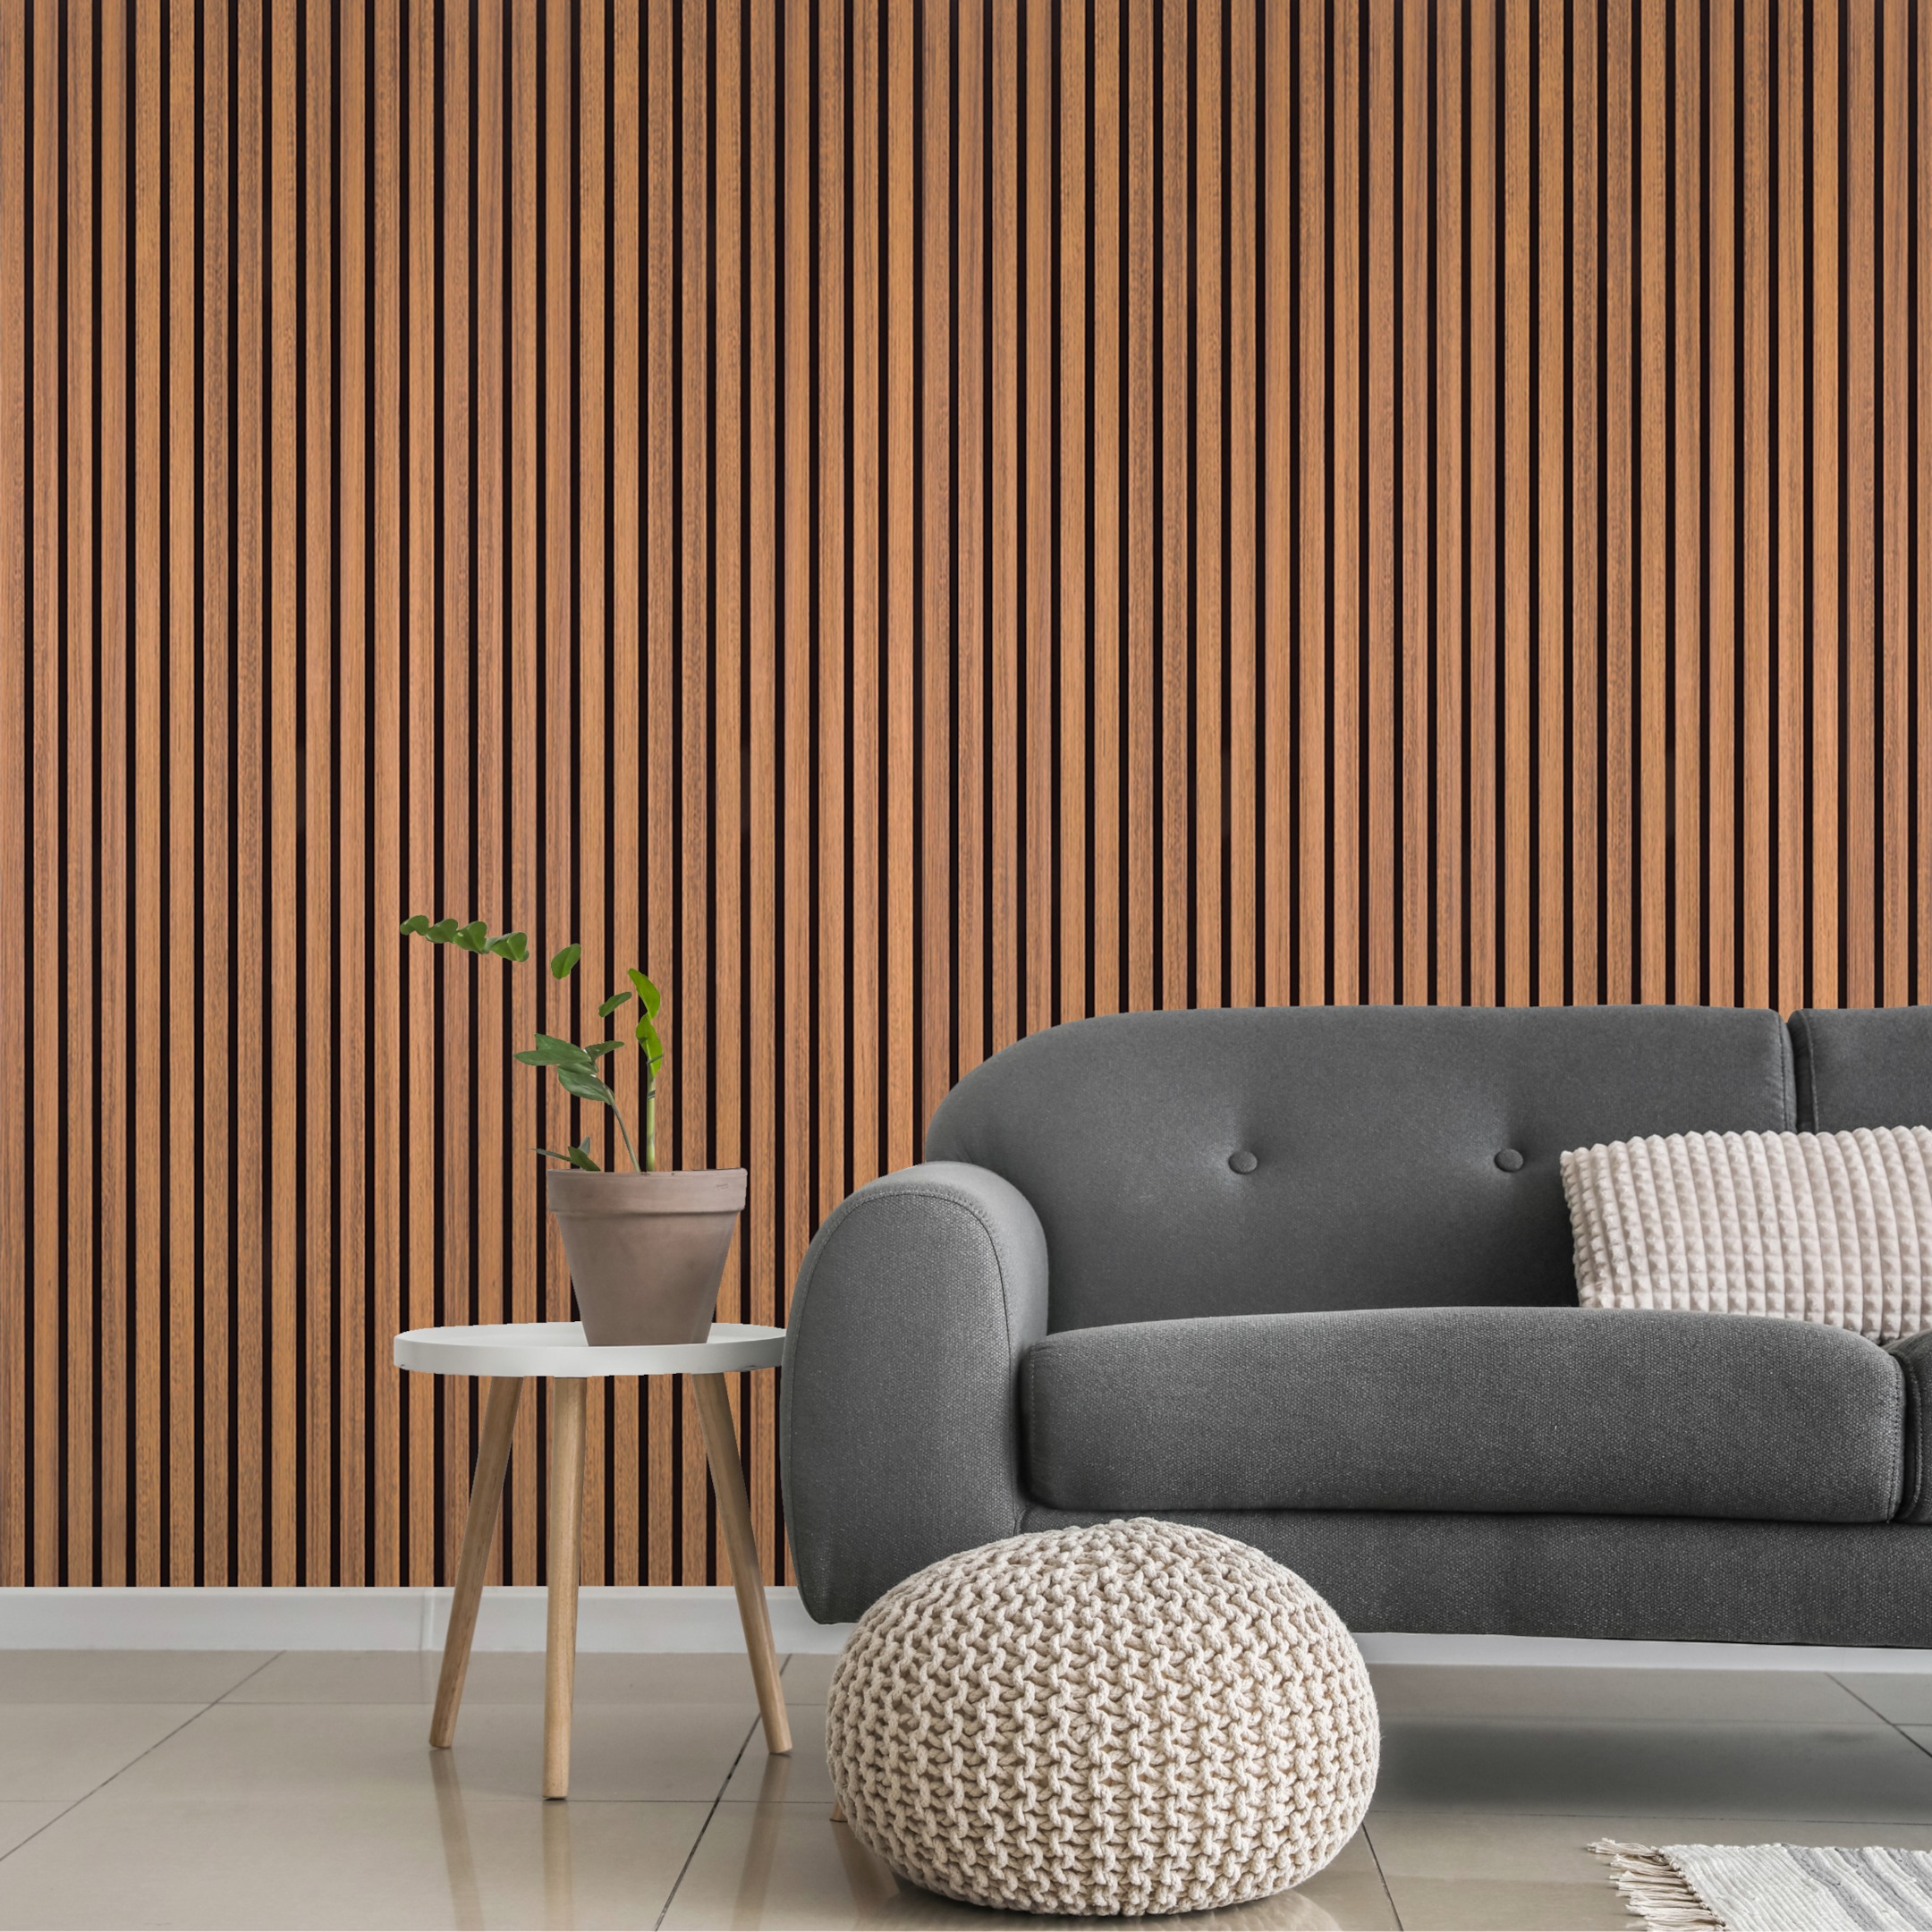 Acoustic wall panels on a wall, absorbing sound waves